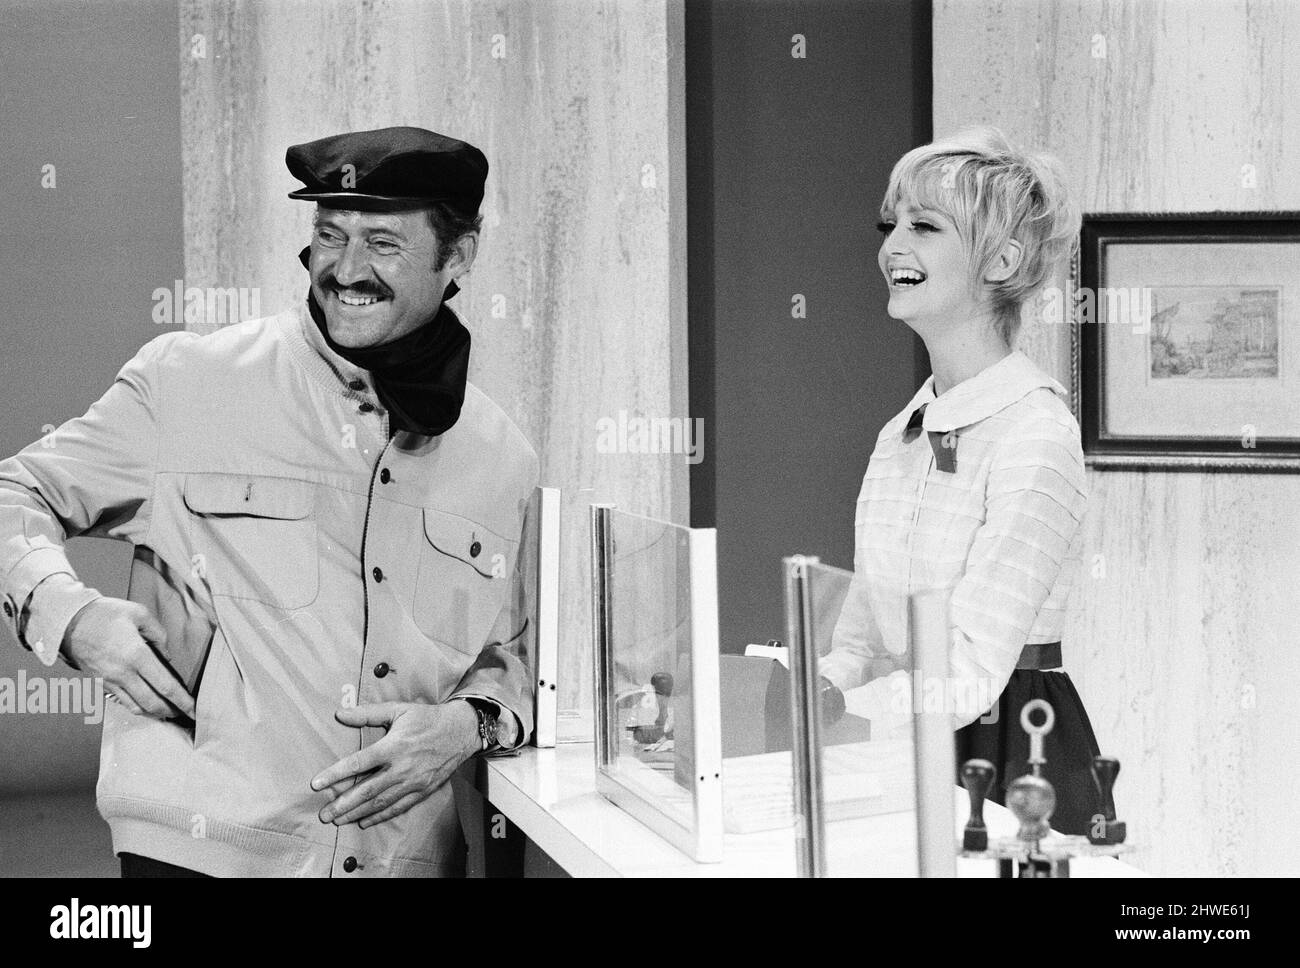 Rowan & Martin's Laugh-In, an American sketch comedy television program on the NBC television network, behind the scenes filming for series 2 episode 22, (aired Monday 3rd March 1969), in studio, Wednesday 15th January 1969. Our picture shows ... actors Dan Rowan and Goldie Hawn. Stock Photo